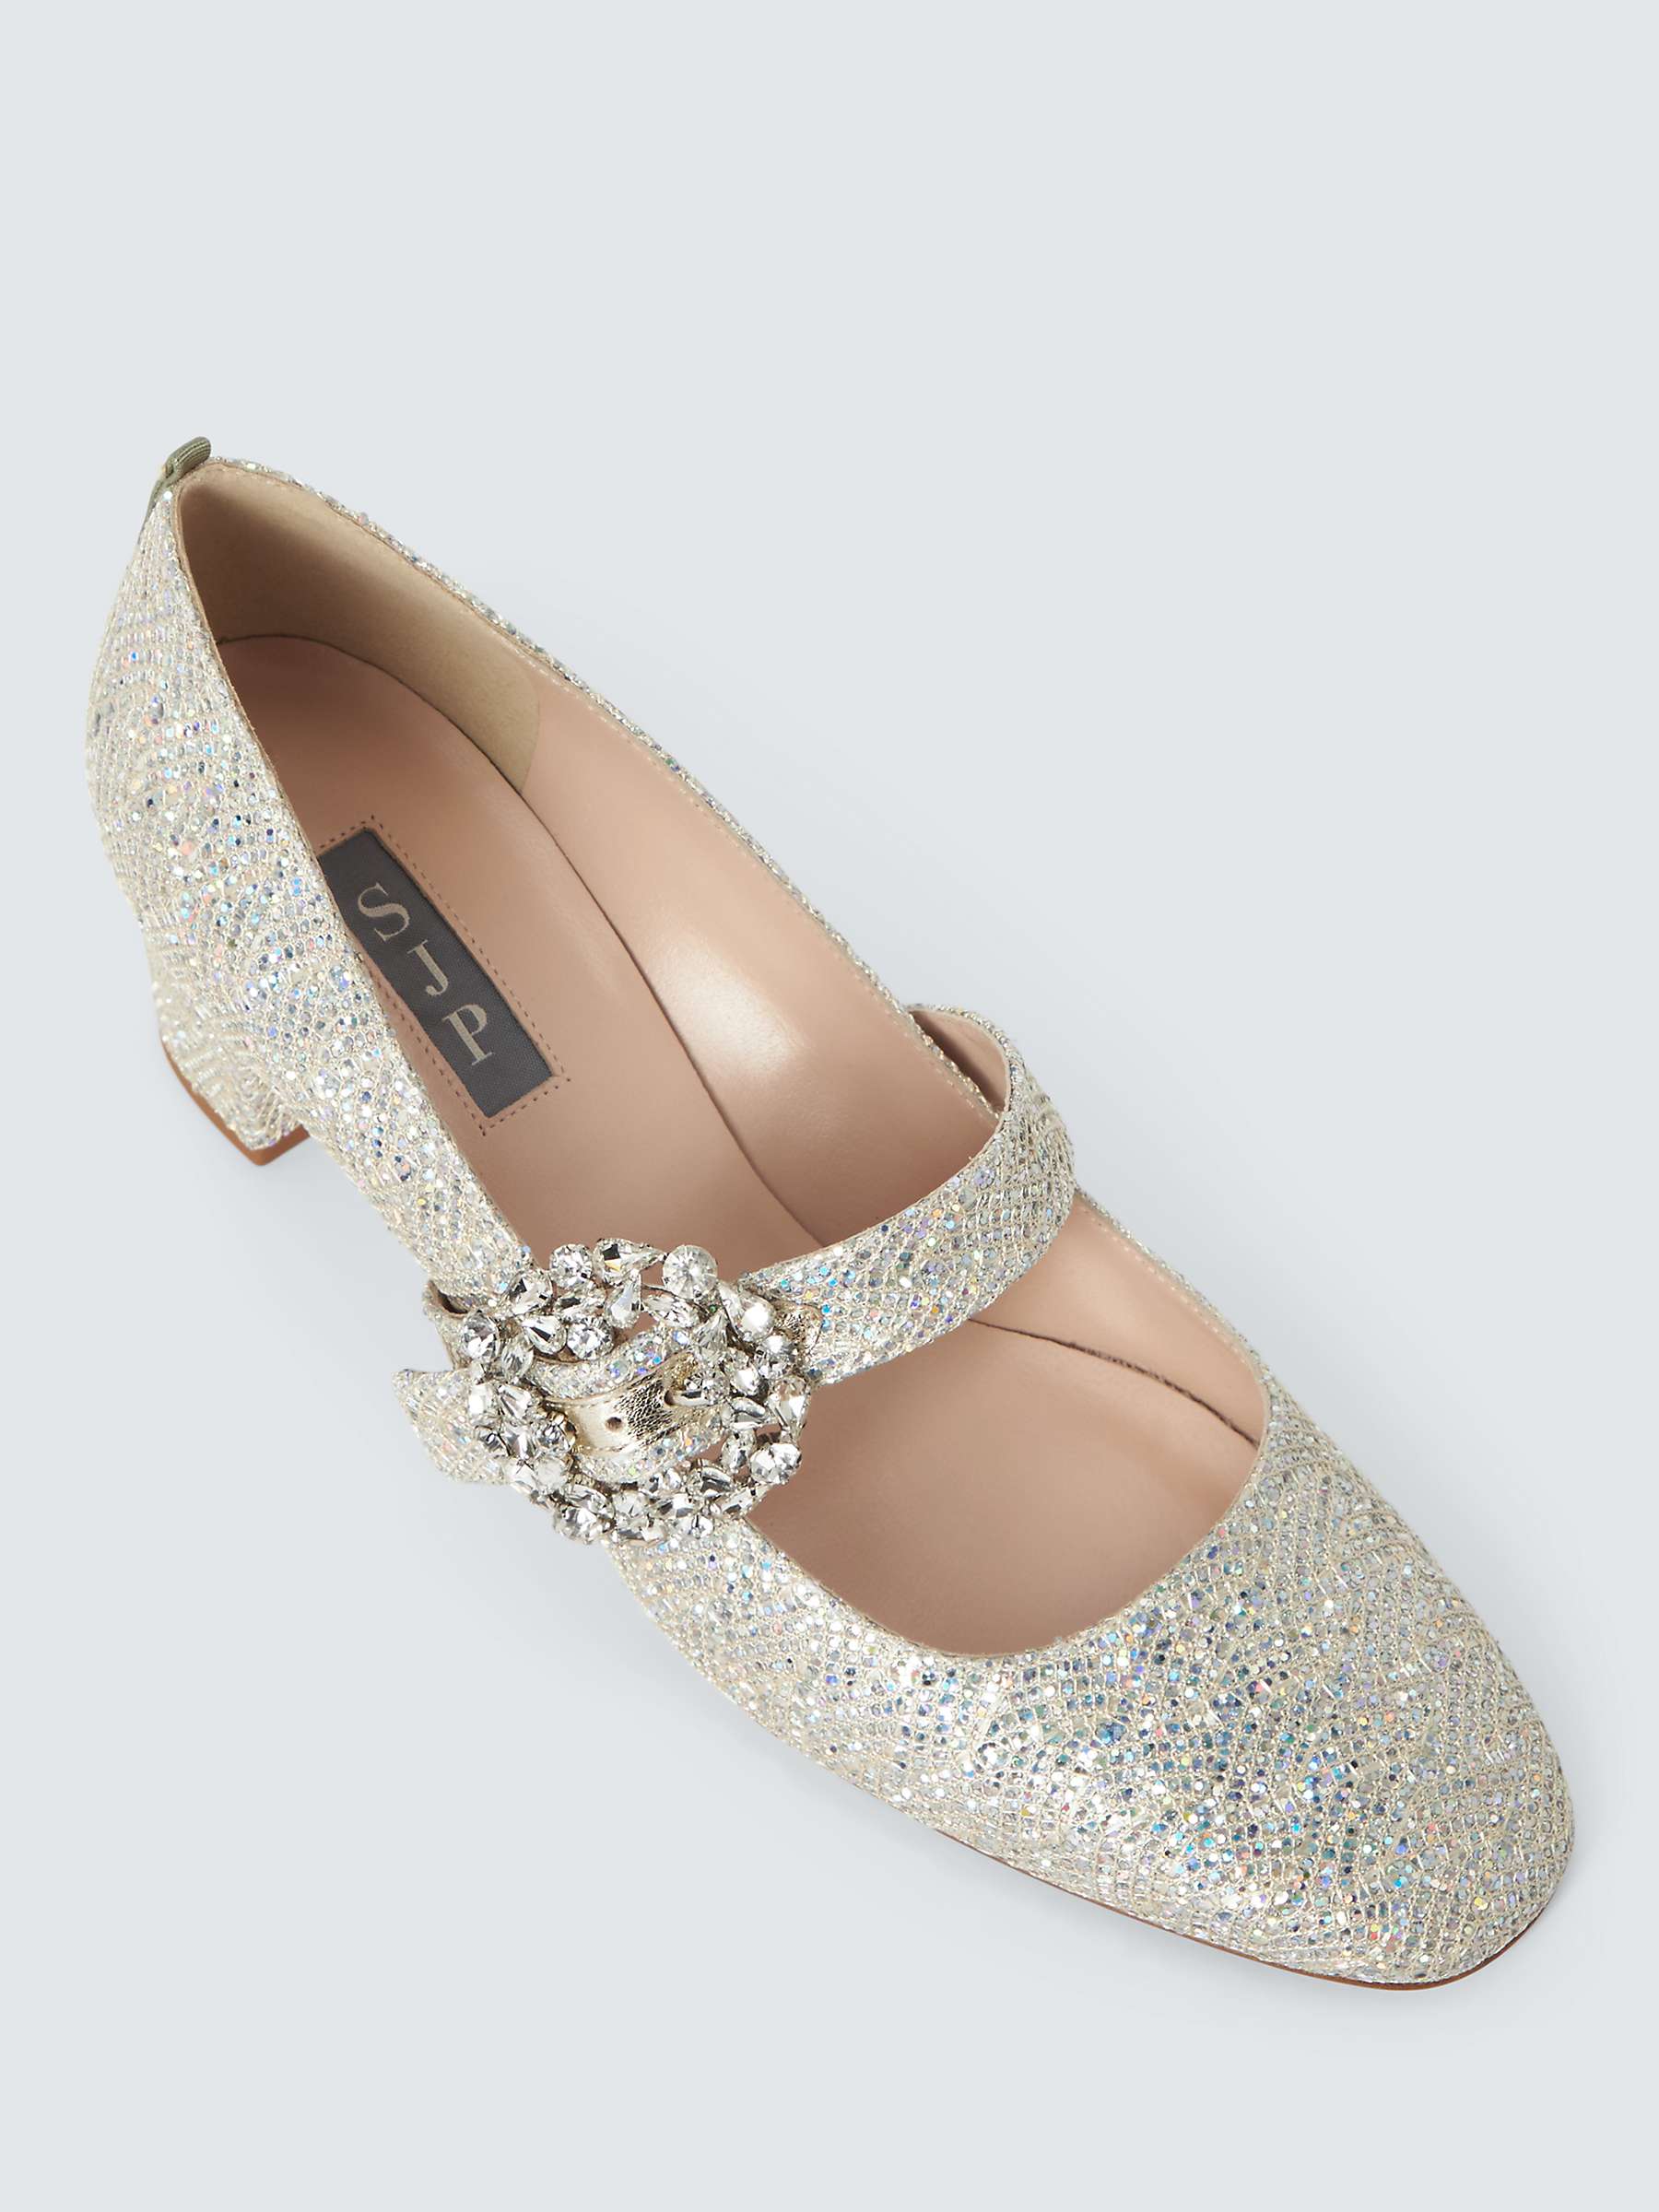 Buy SJP by Sarah Jessica Parker Cosette Mary Jane Court Shoes, Blizzard Glitter Online at johnlewis.com